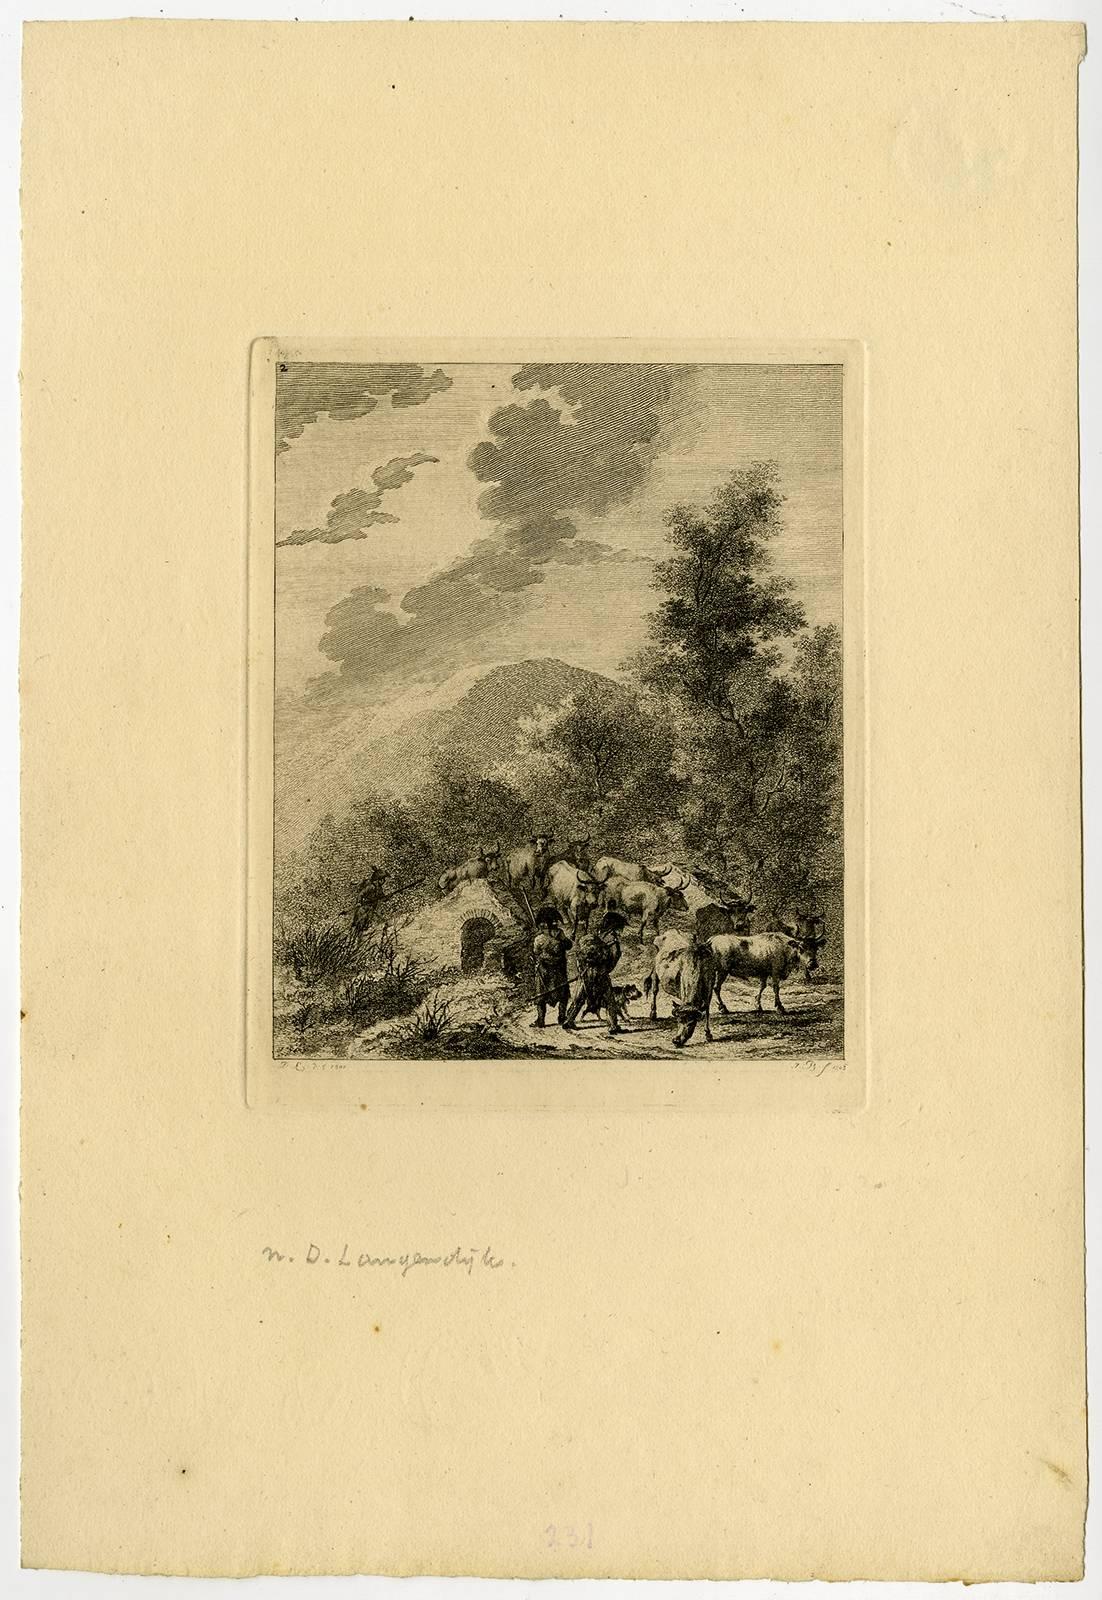 Untitled - Set of 6 landscapes with military subjects. - Print by Johannes Adriaansz Bemme